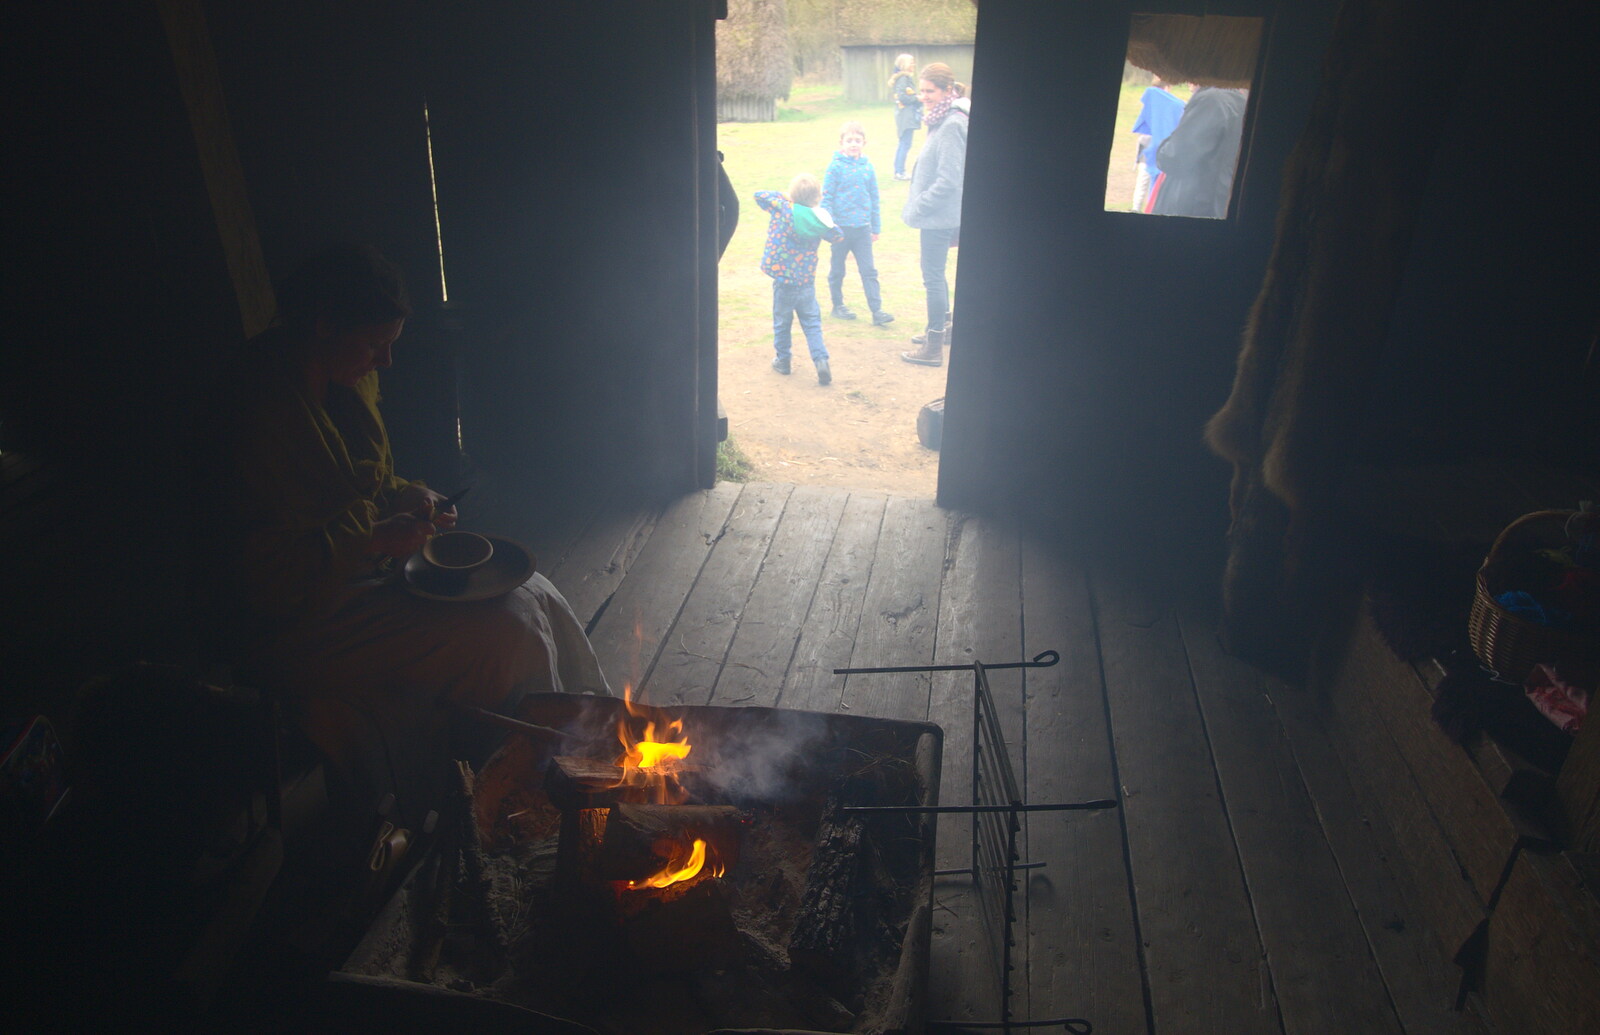 A smoky room - quite nice once you get used to it from An Anglo-Saxon Village, West Stow, Suffolk - 19th February 2017